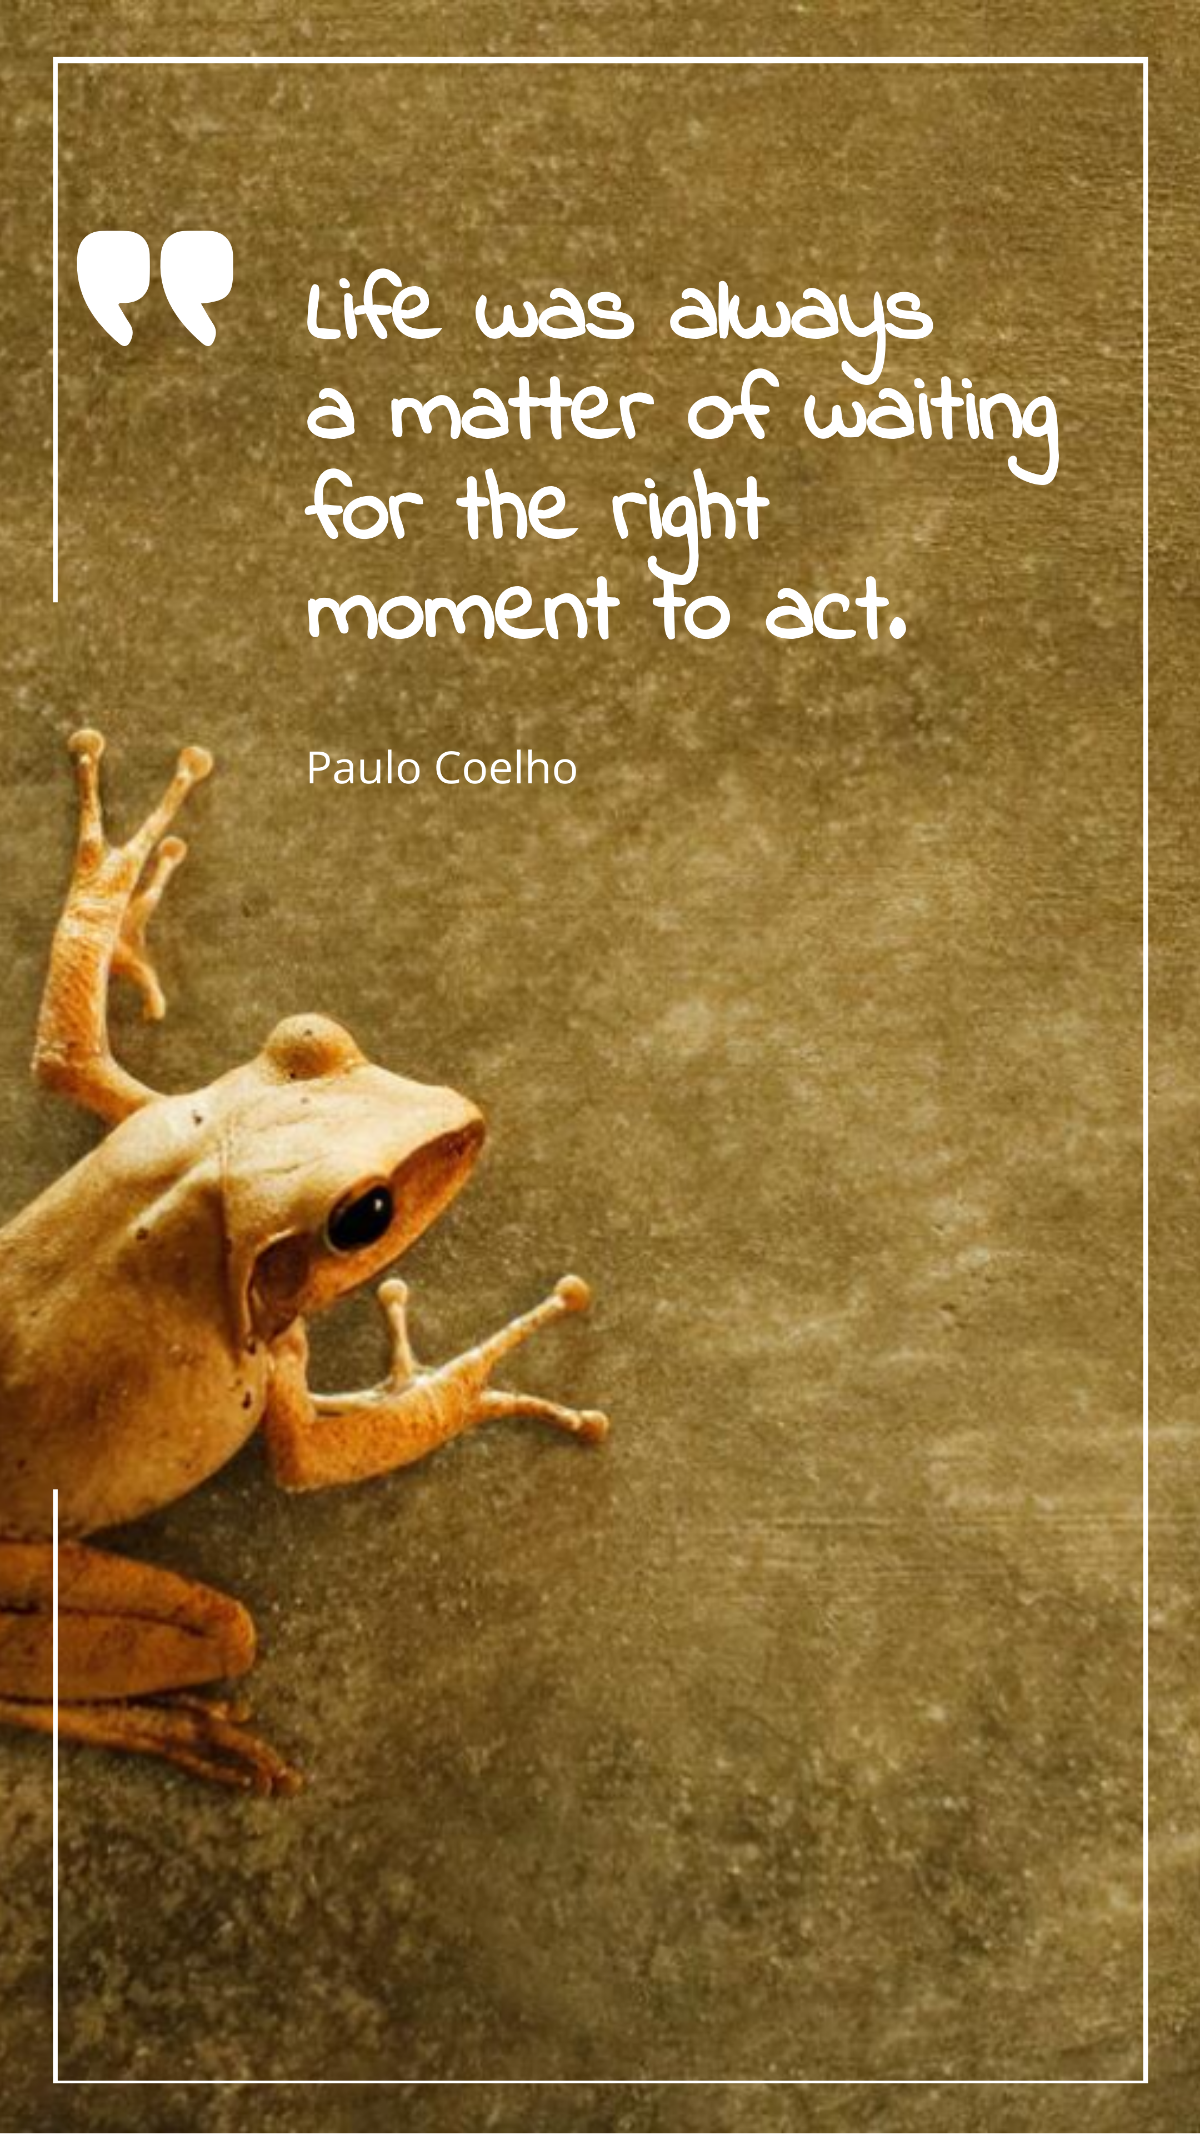 Paulo Coelho - Life was always a matter of waiting for the right moment to act. Template